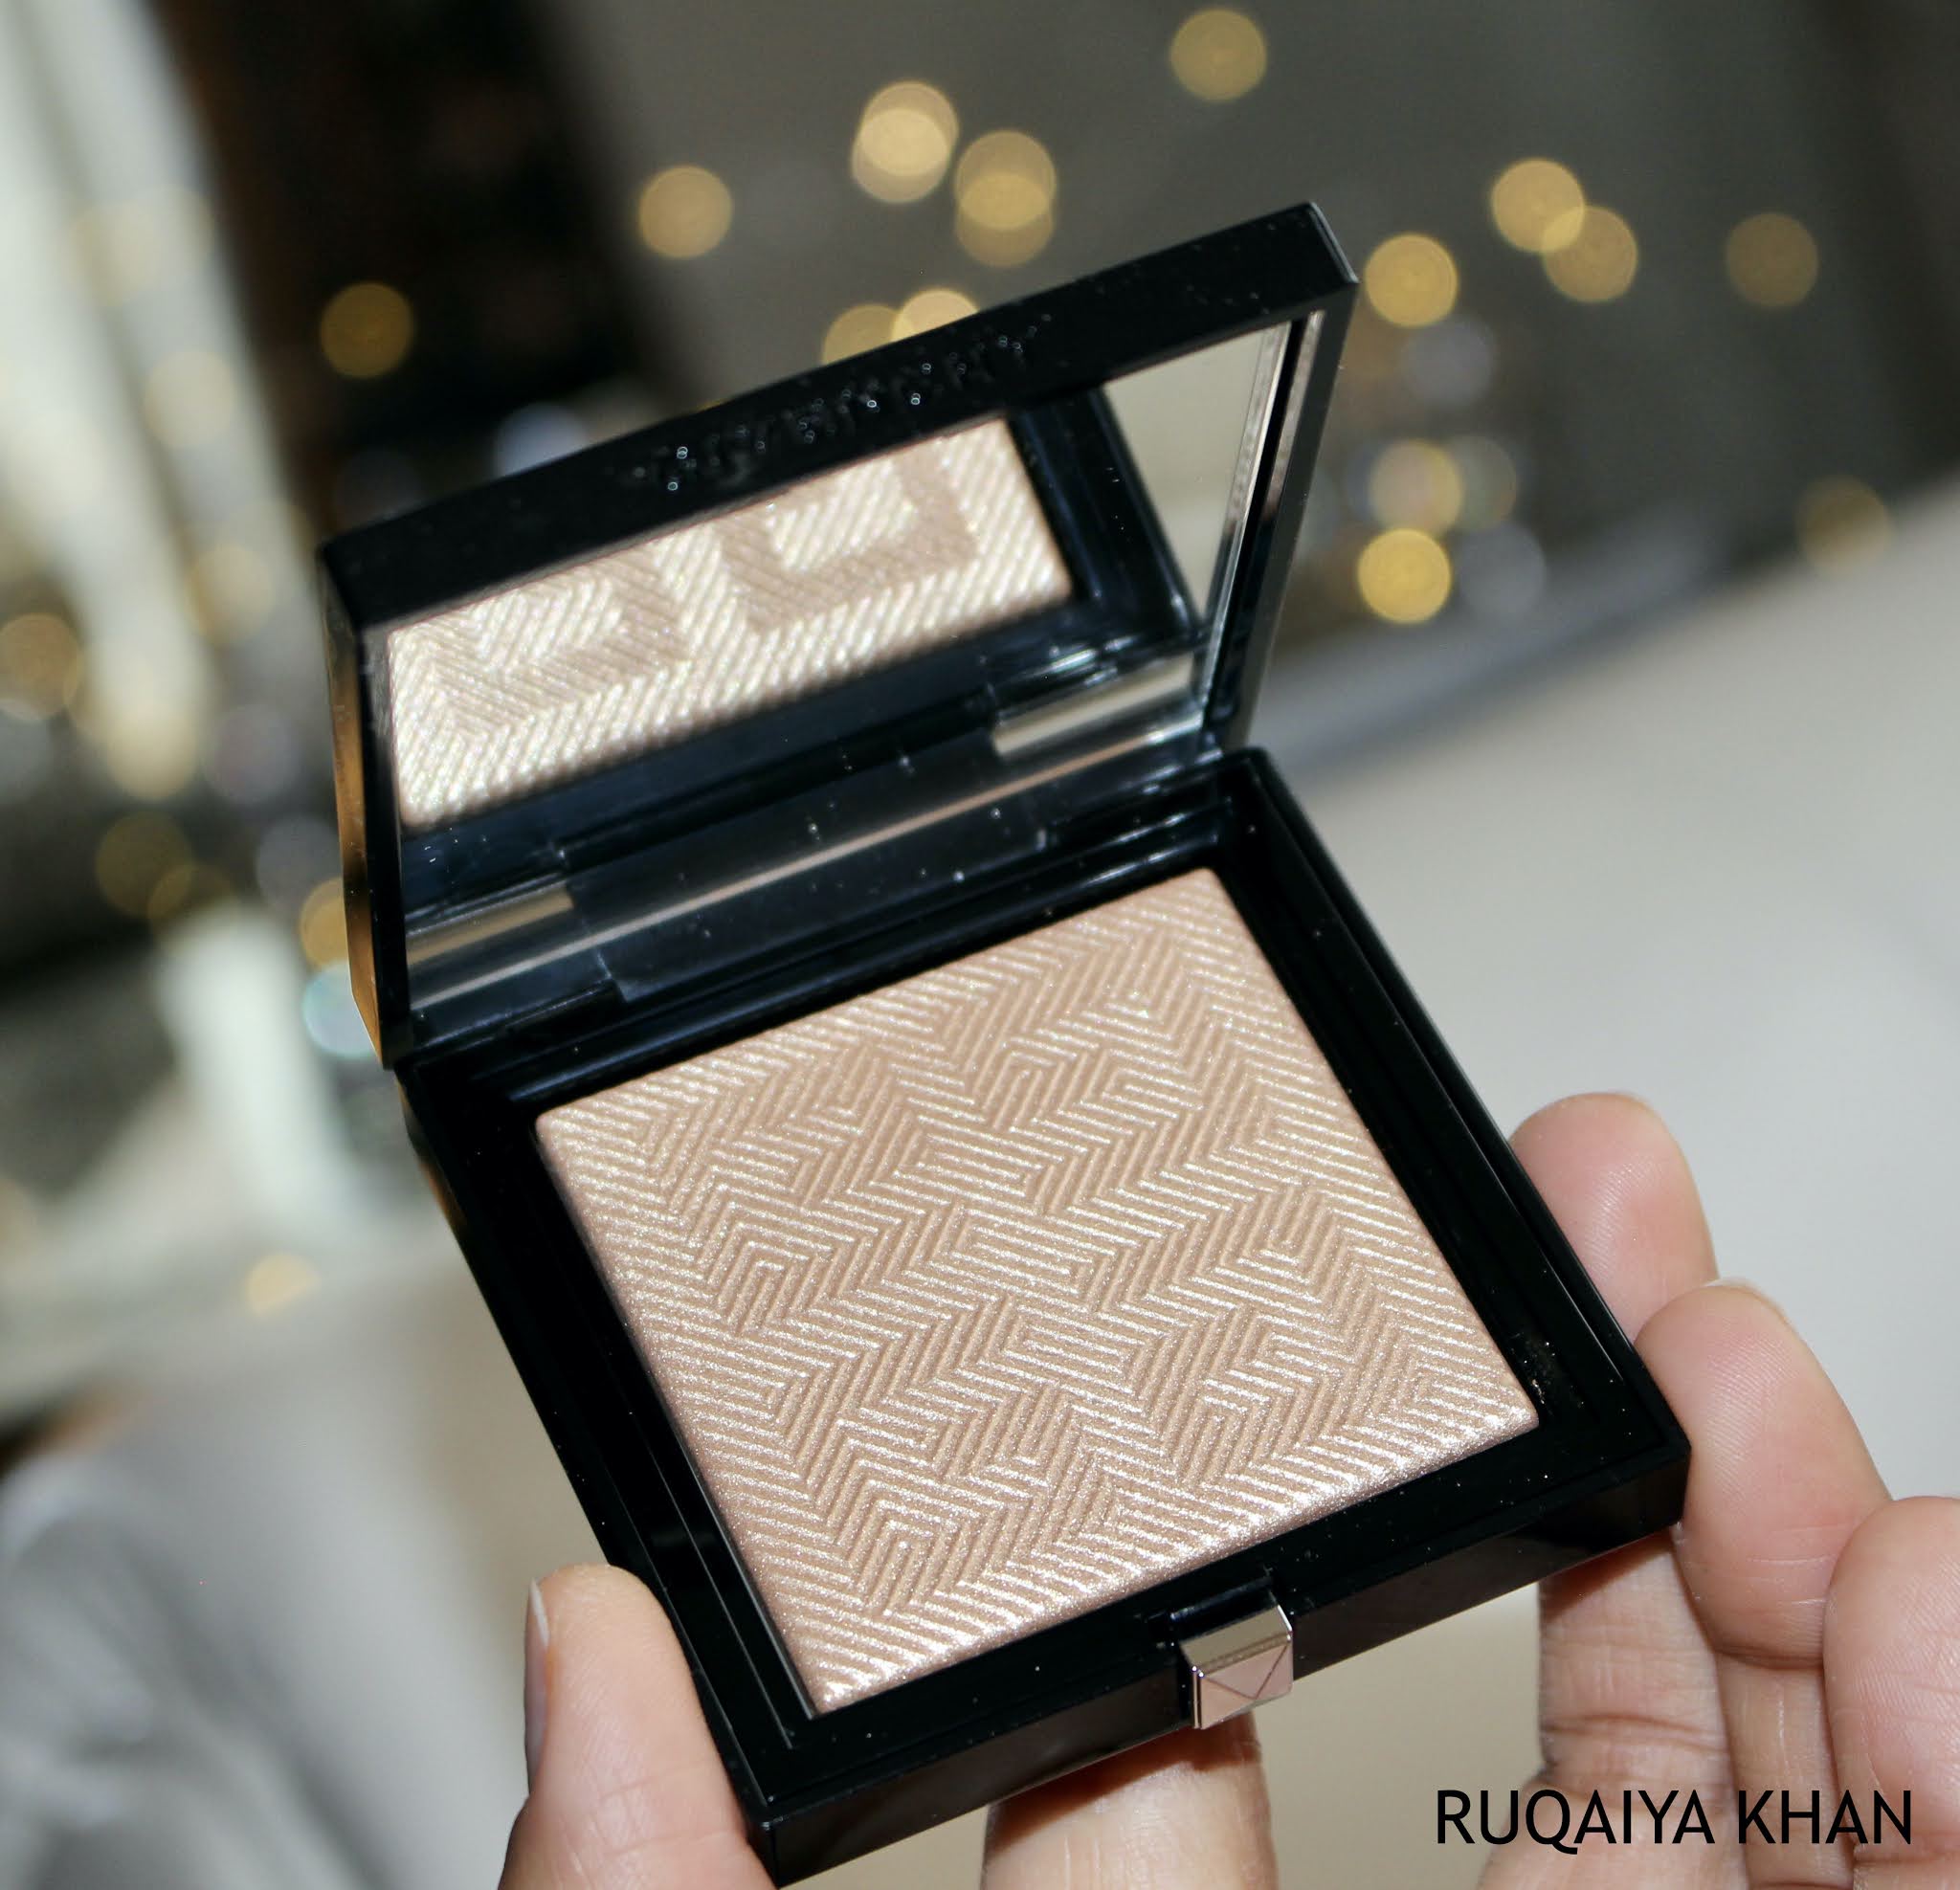 givenchy teint couture highlighter